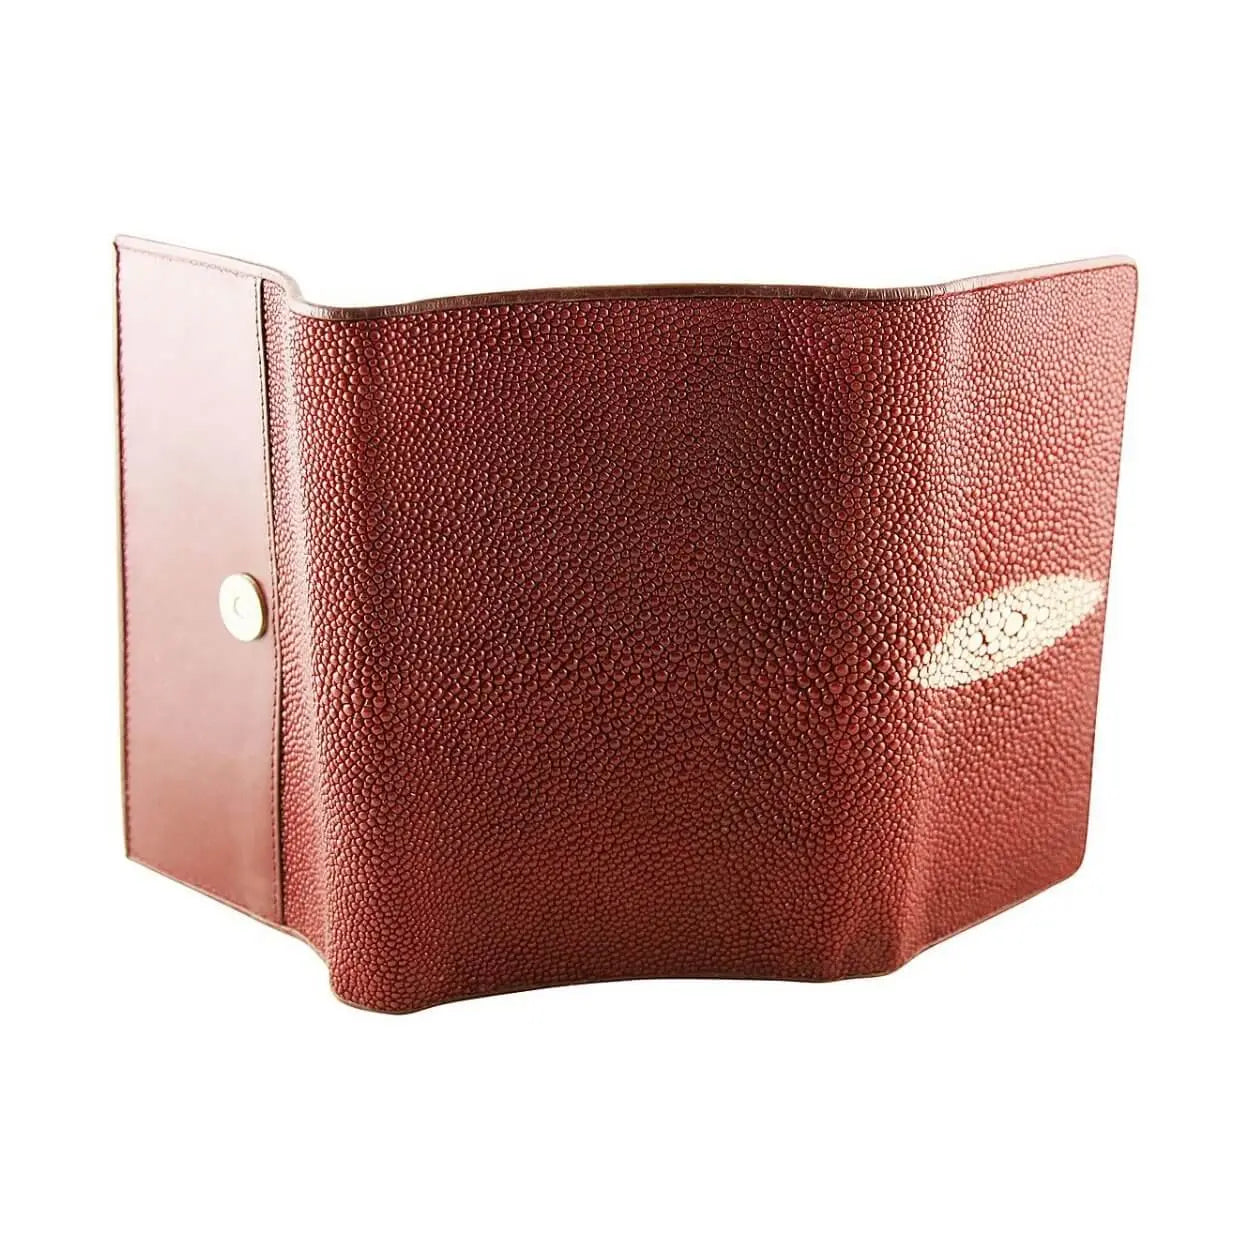 Red color Ladies wallet of Stingray leather by DeLeo One